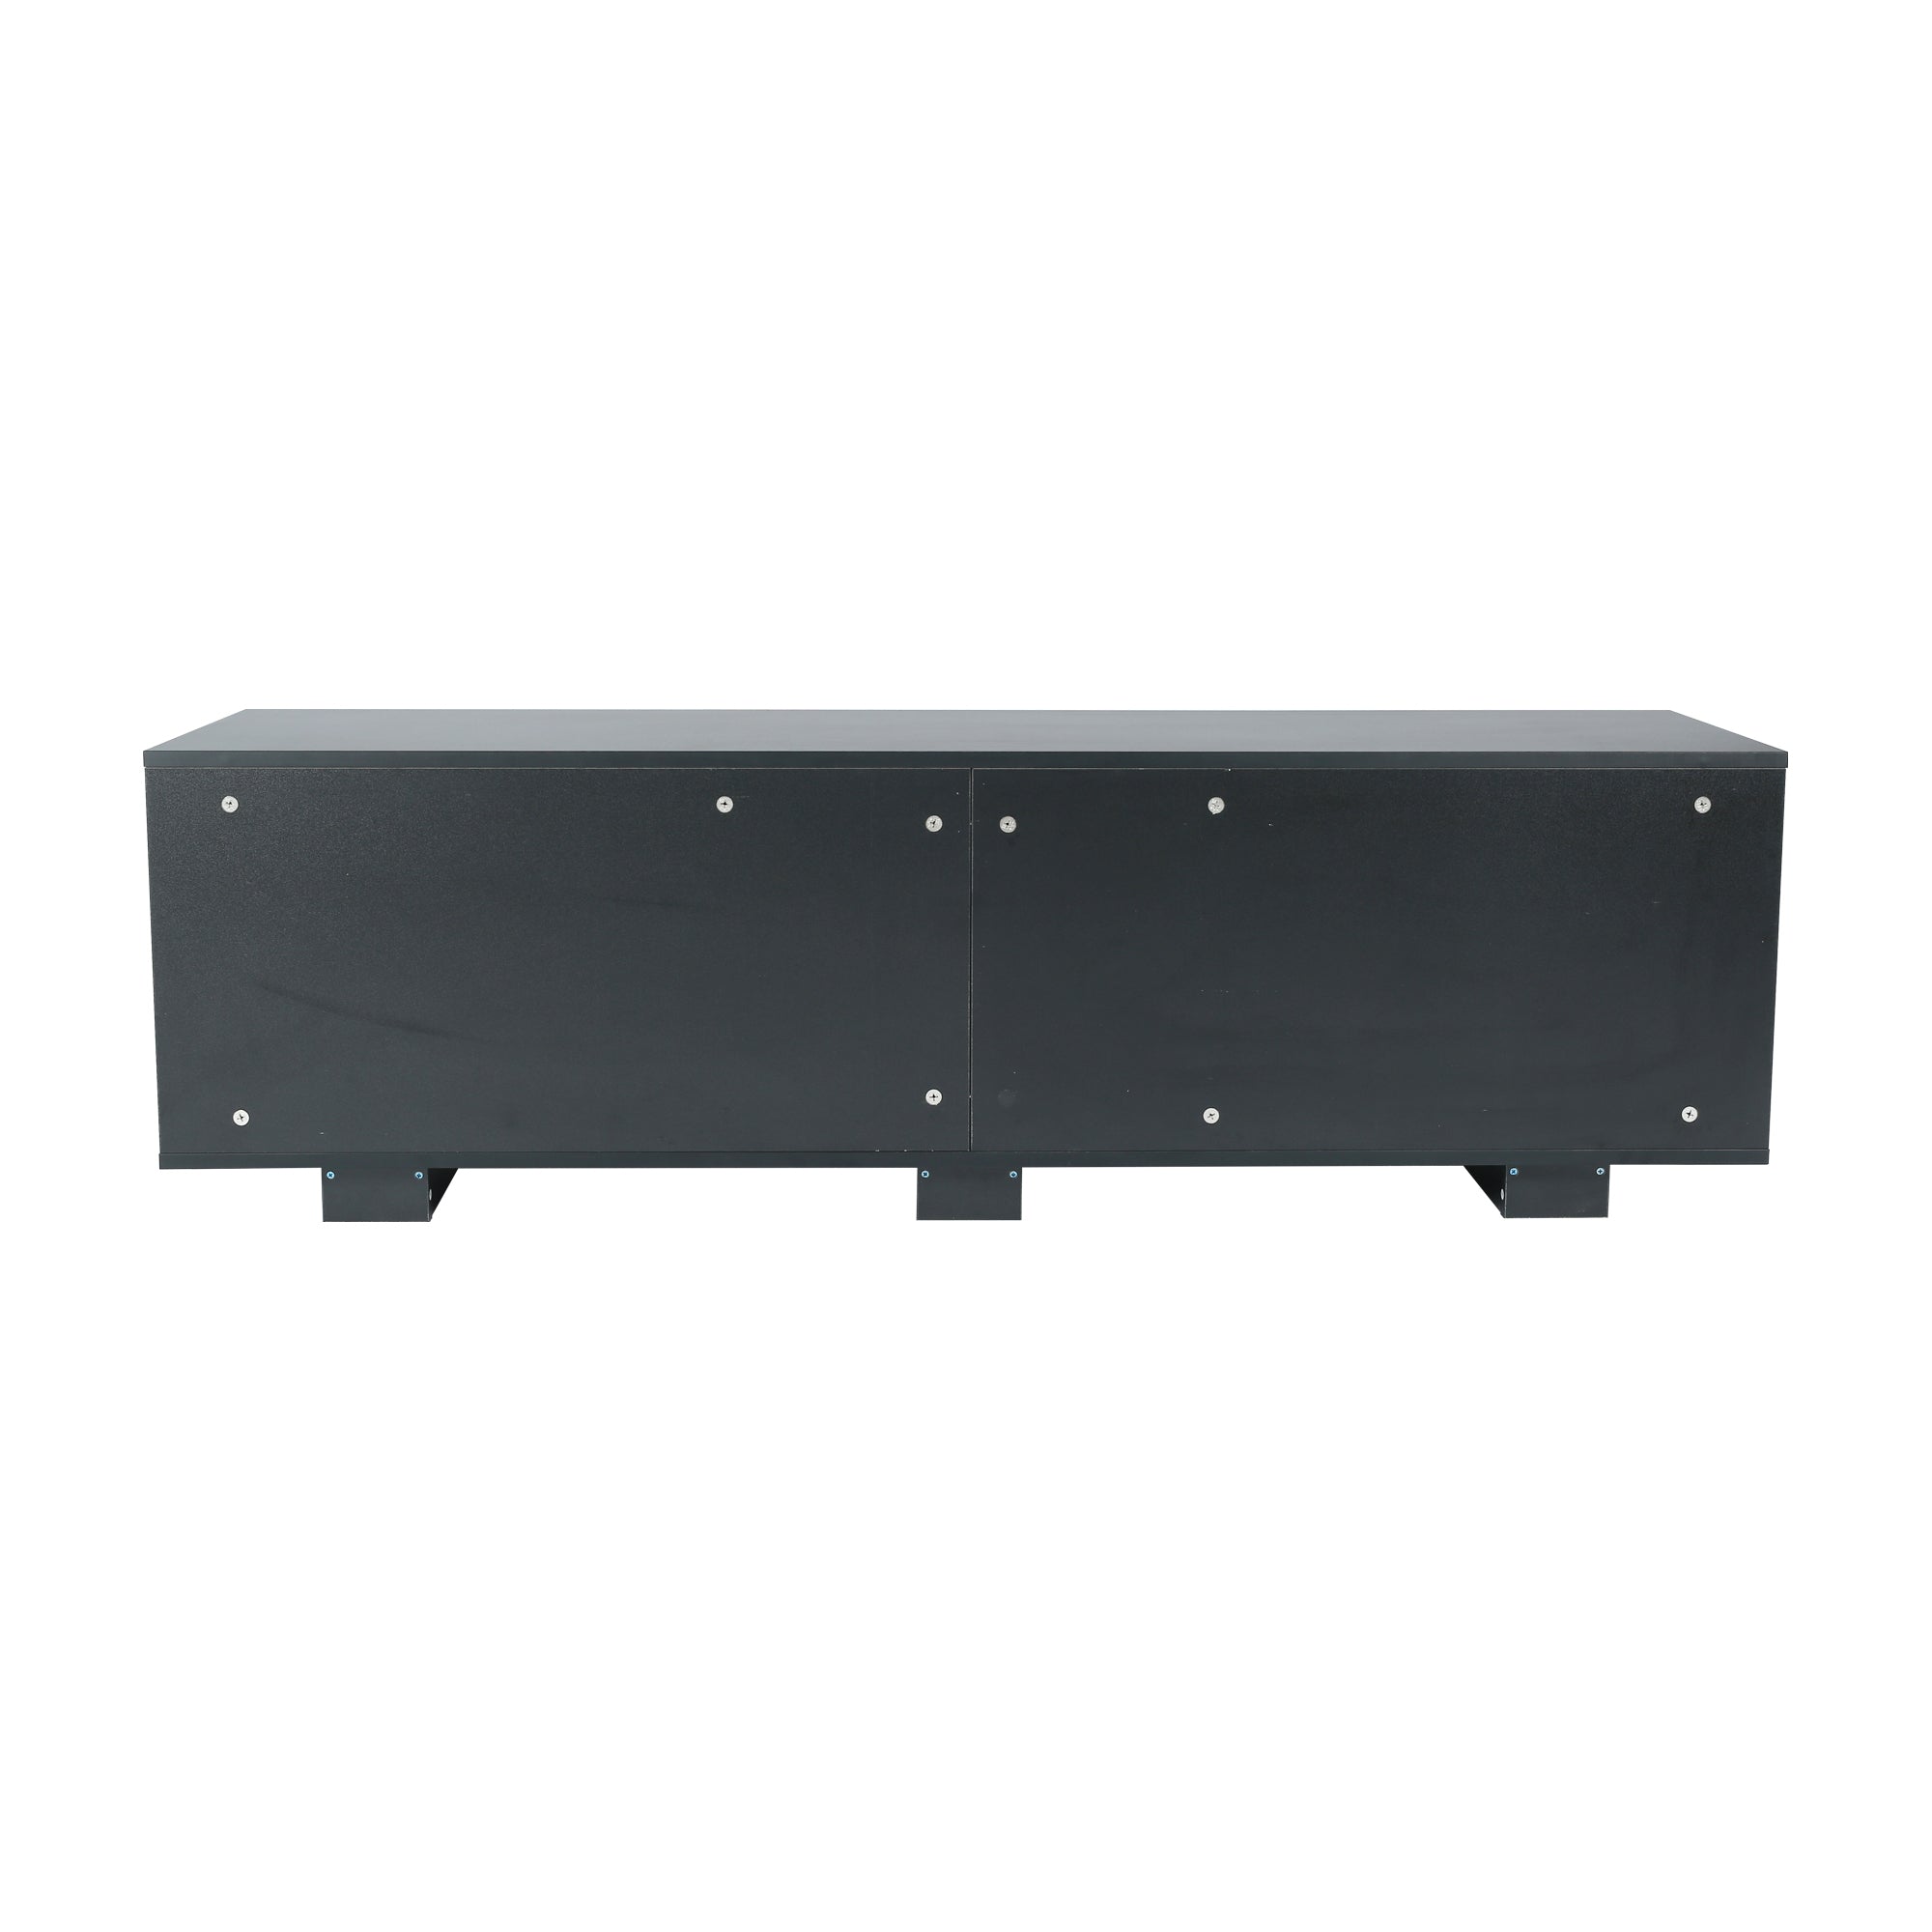 TV Stand for 65" Flat Screen TV (Black)